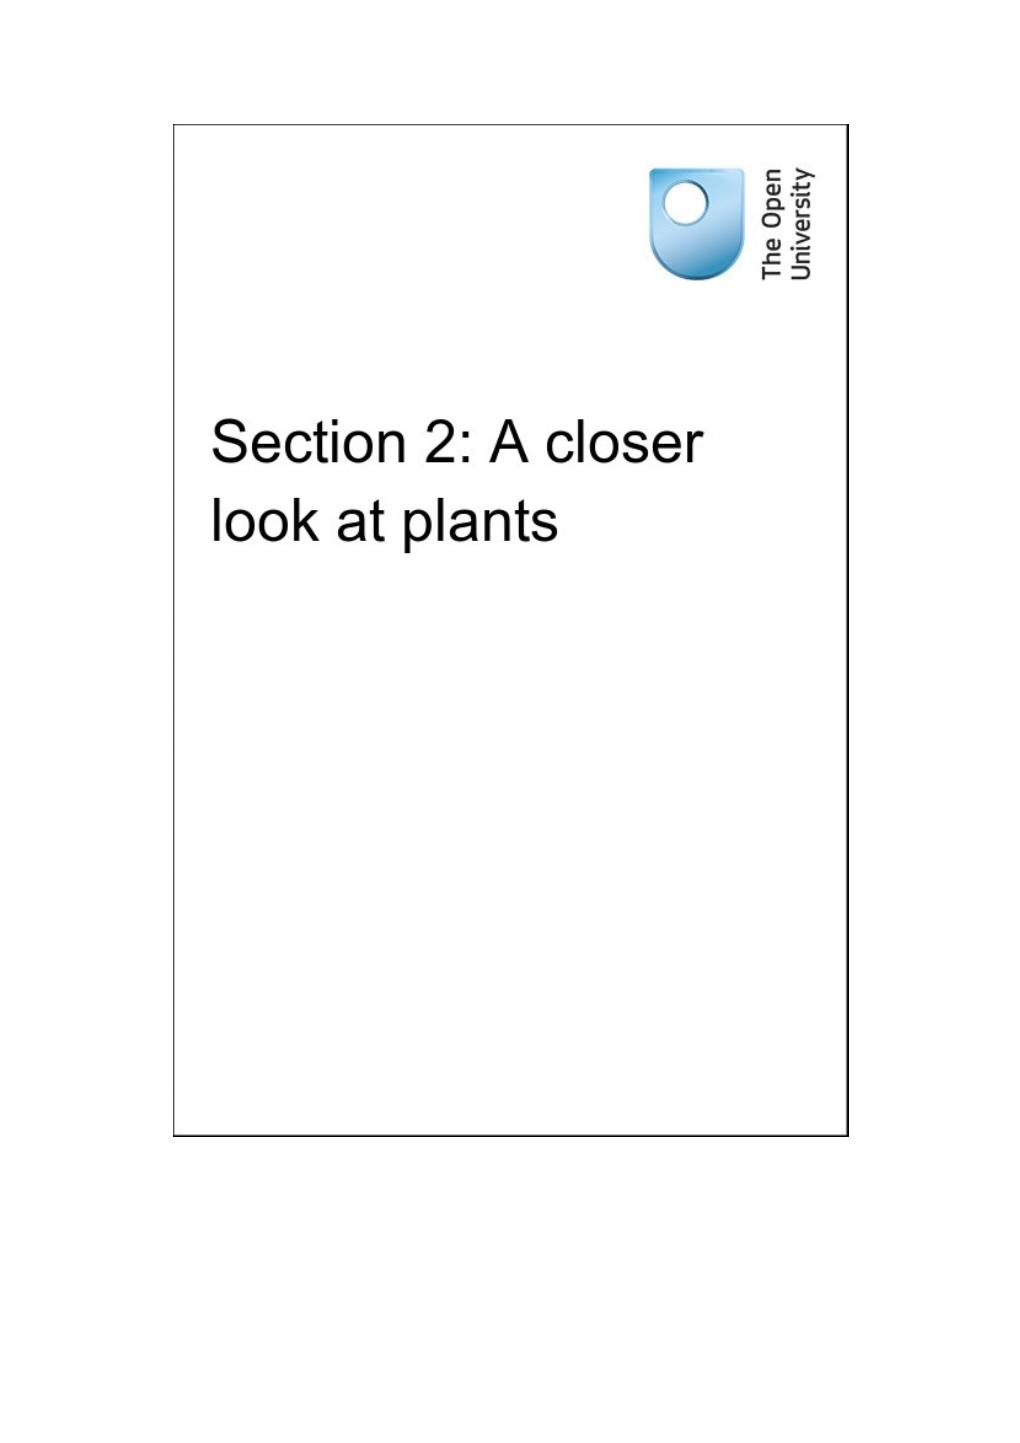 Section 2: a Closer Look at Plants